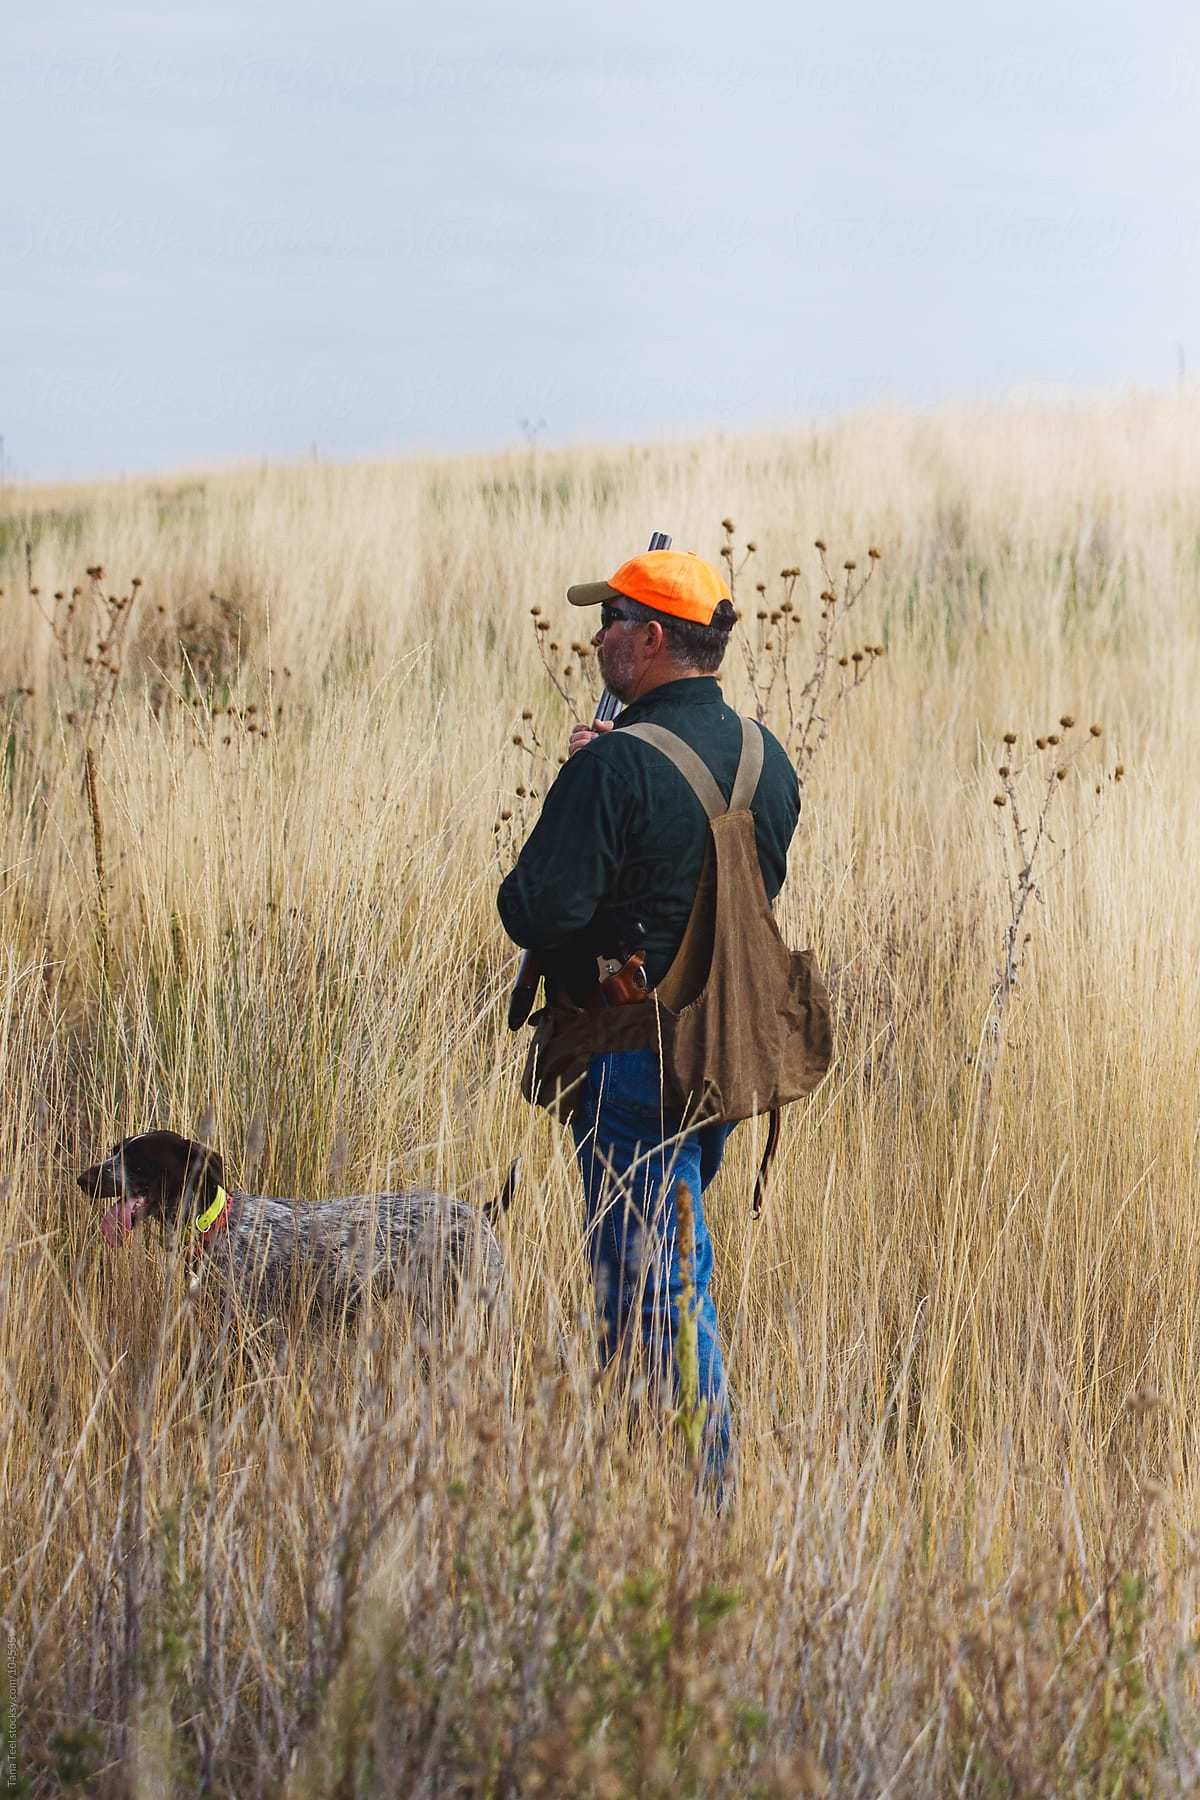 A hunter with his dog searching for fowl in a grassy field